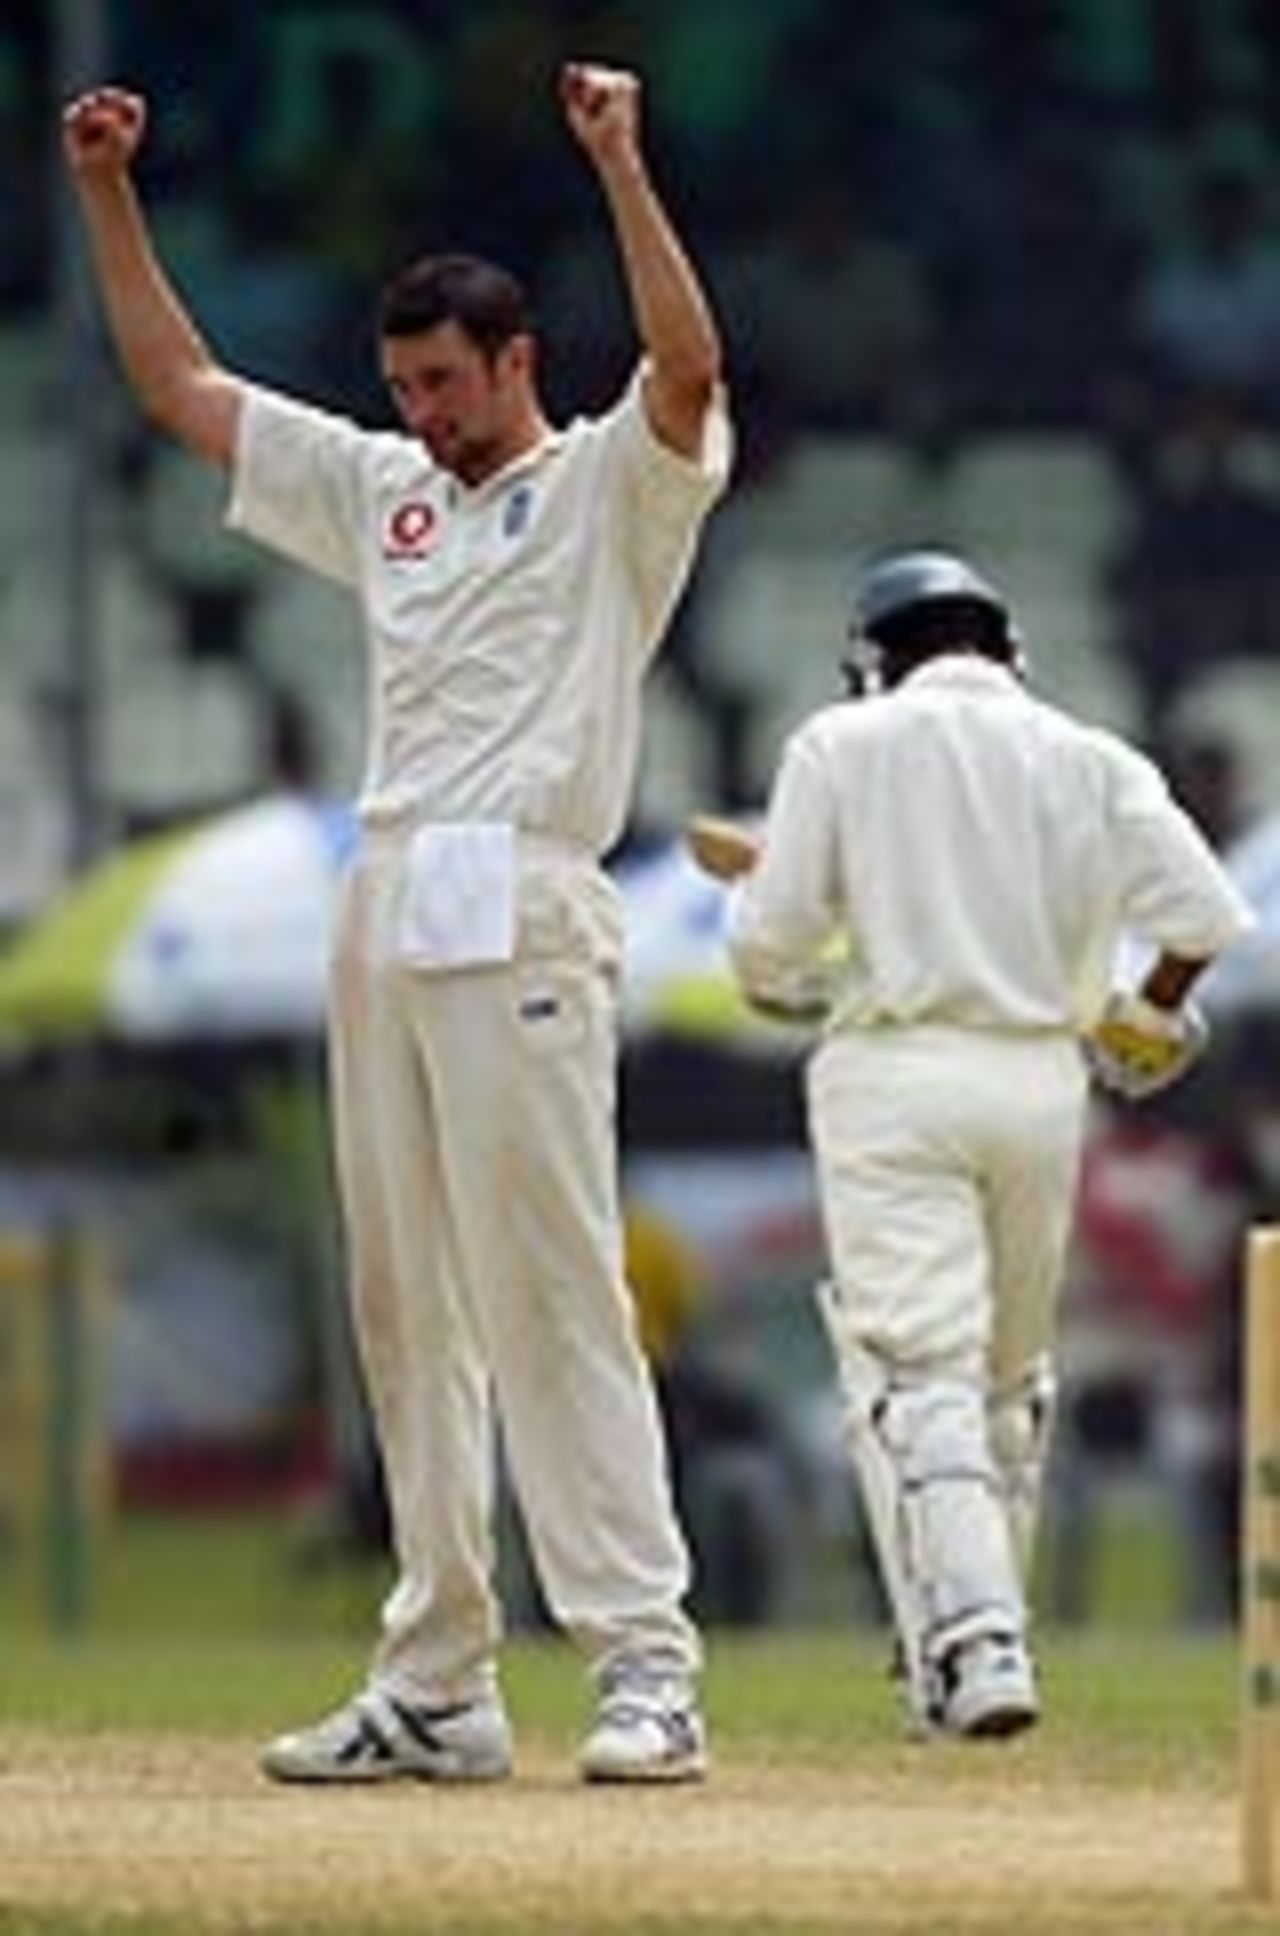 Harmison - nine for 79 in the match